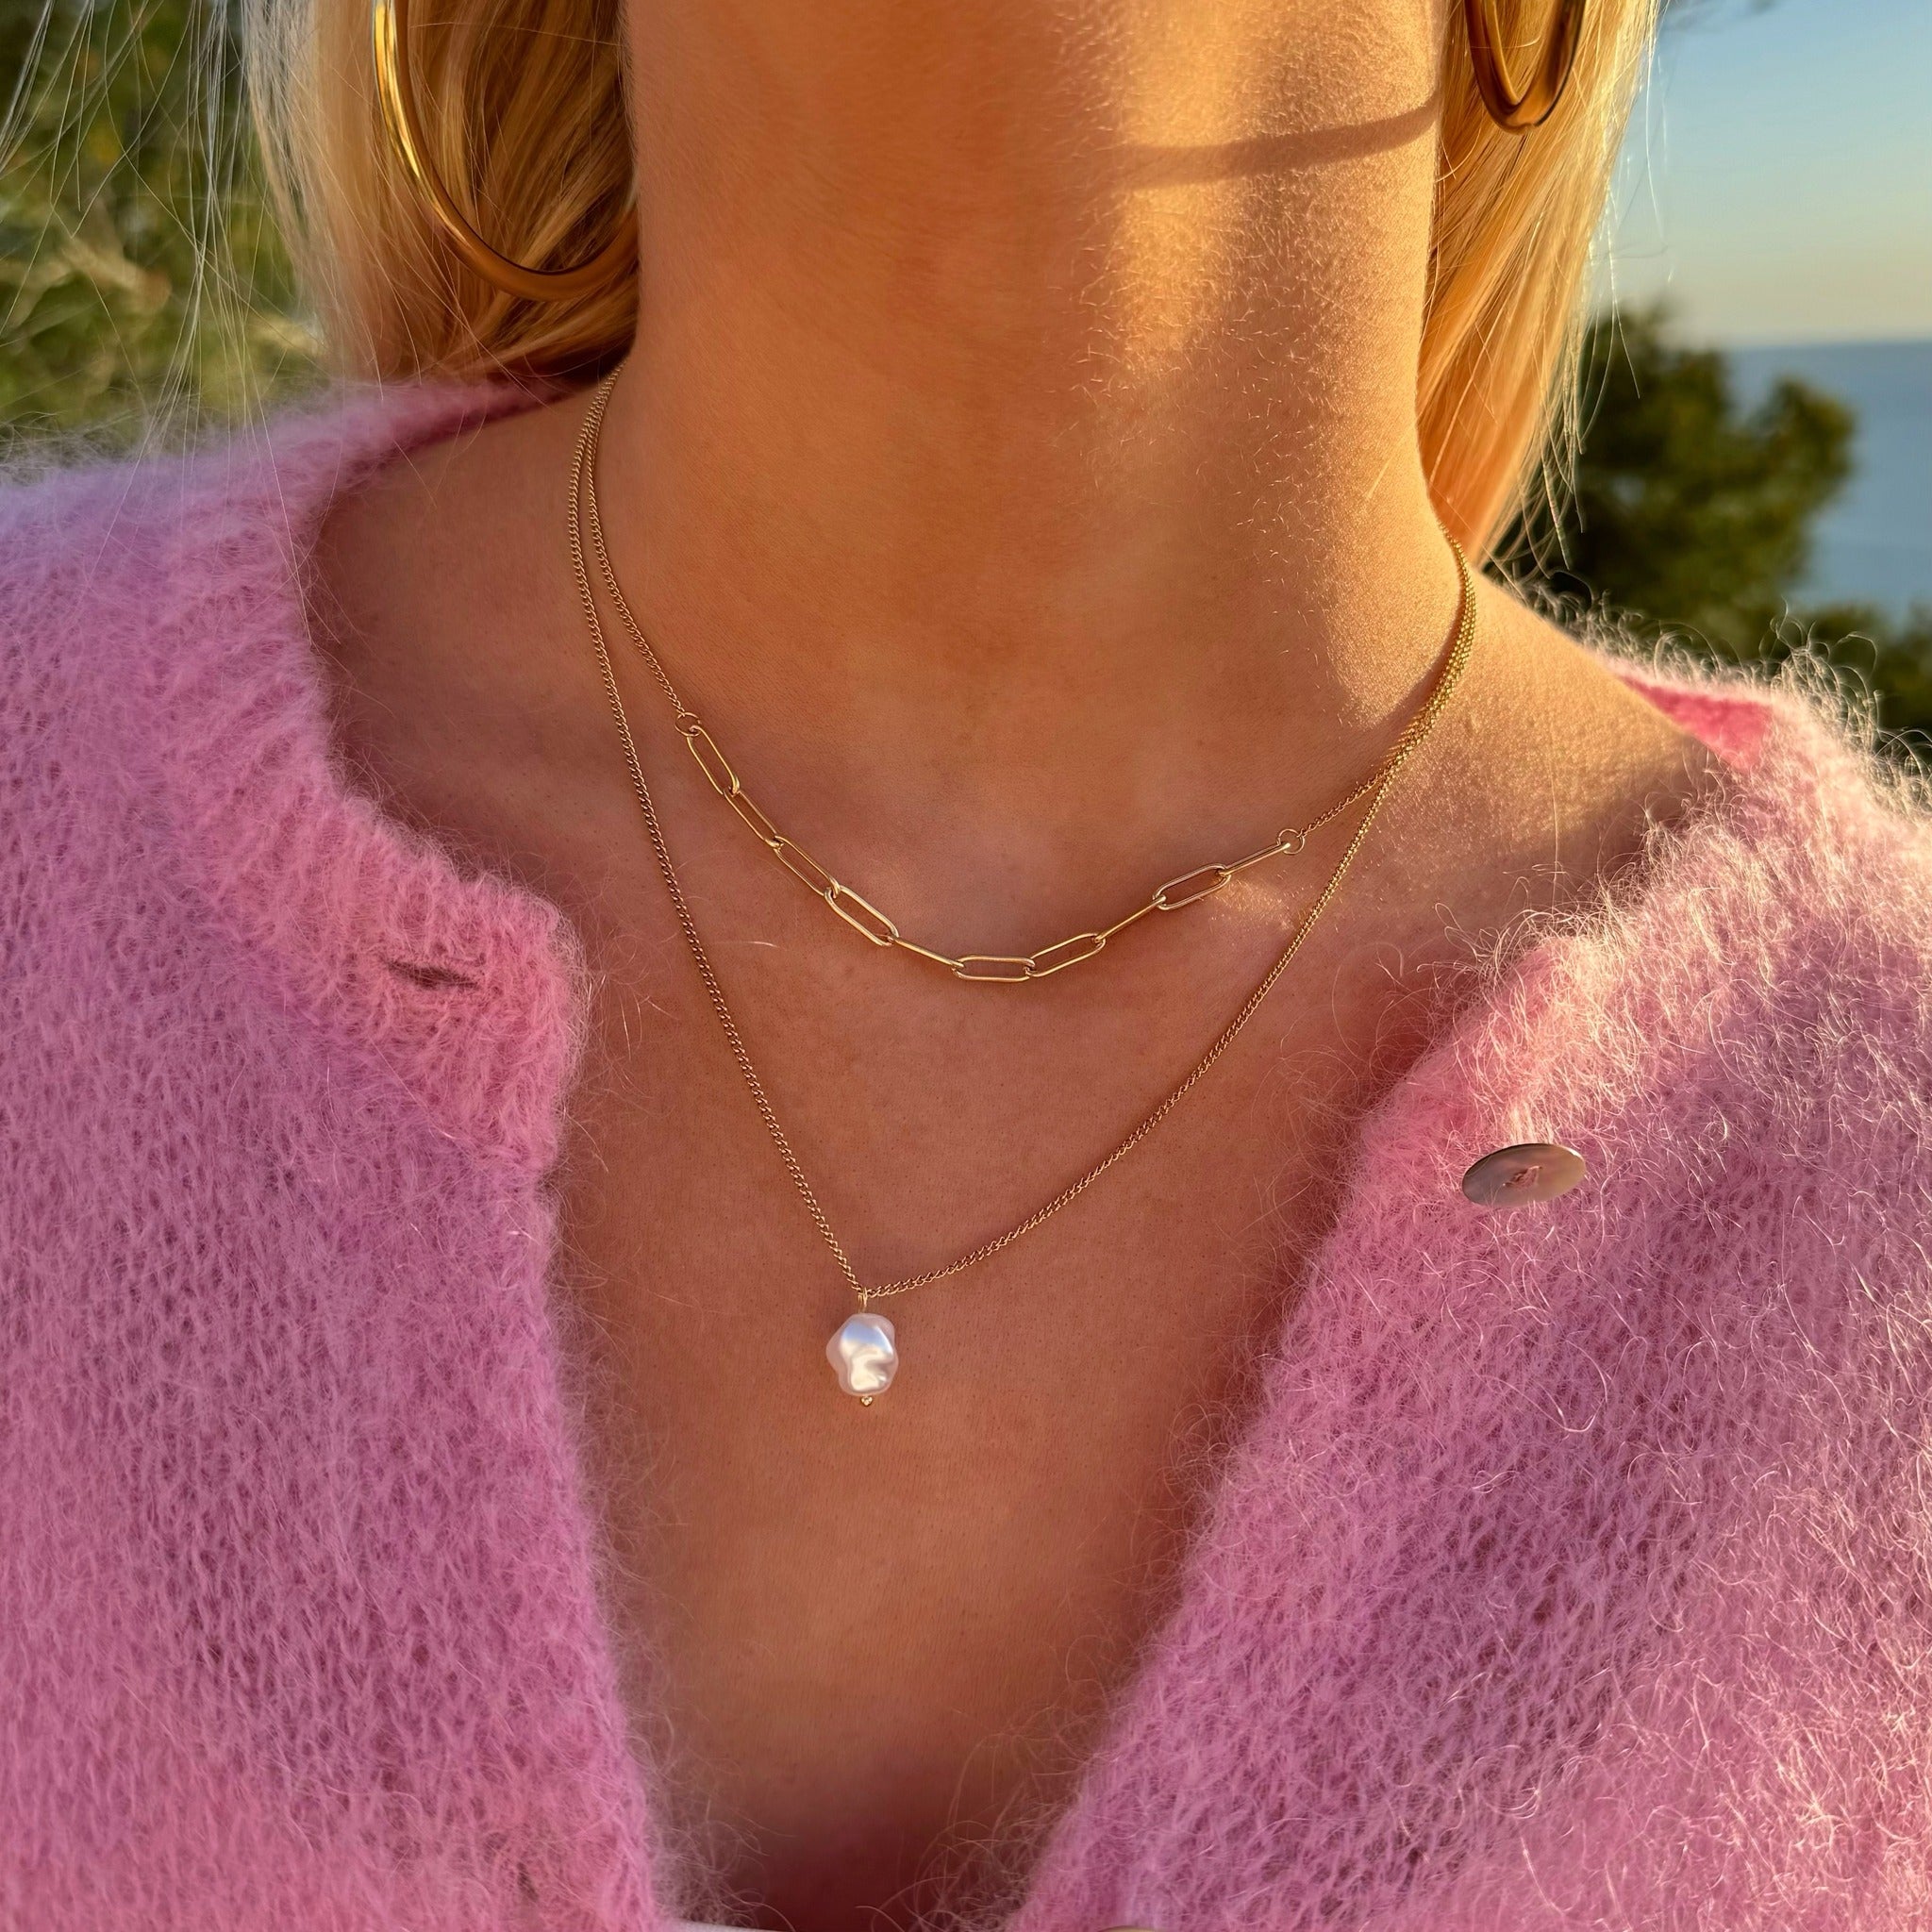 Shiny Ocean Necklace Layered